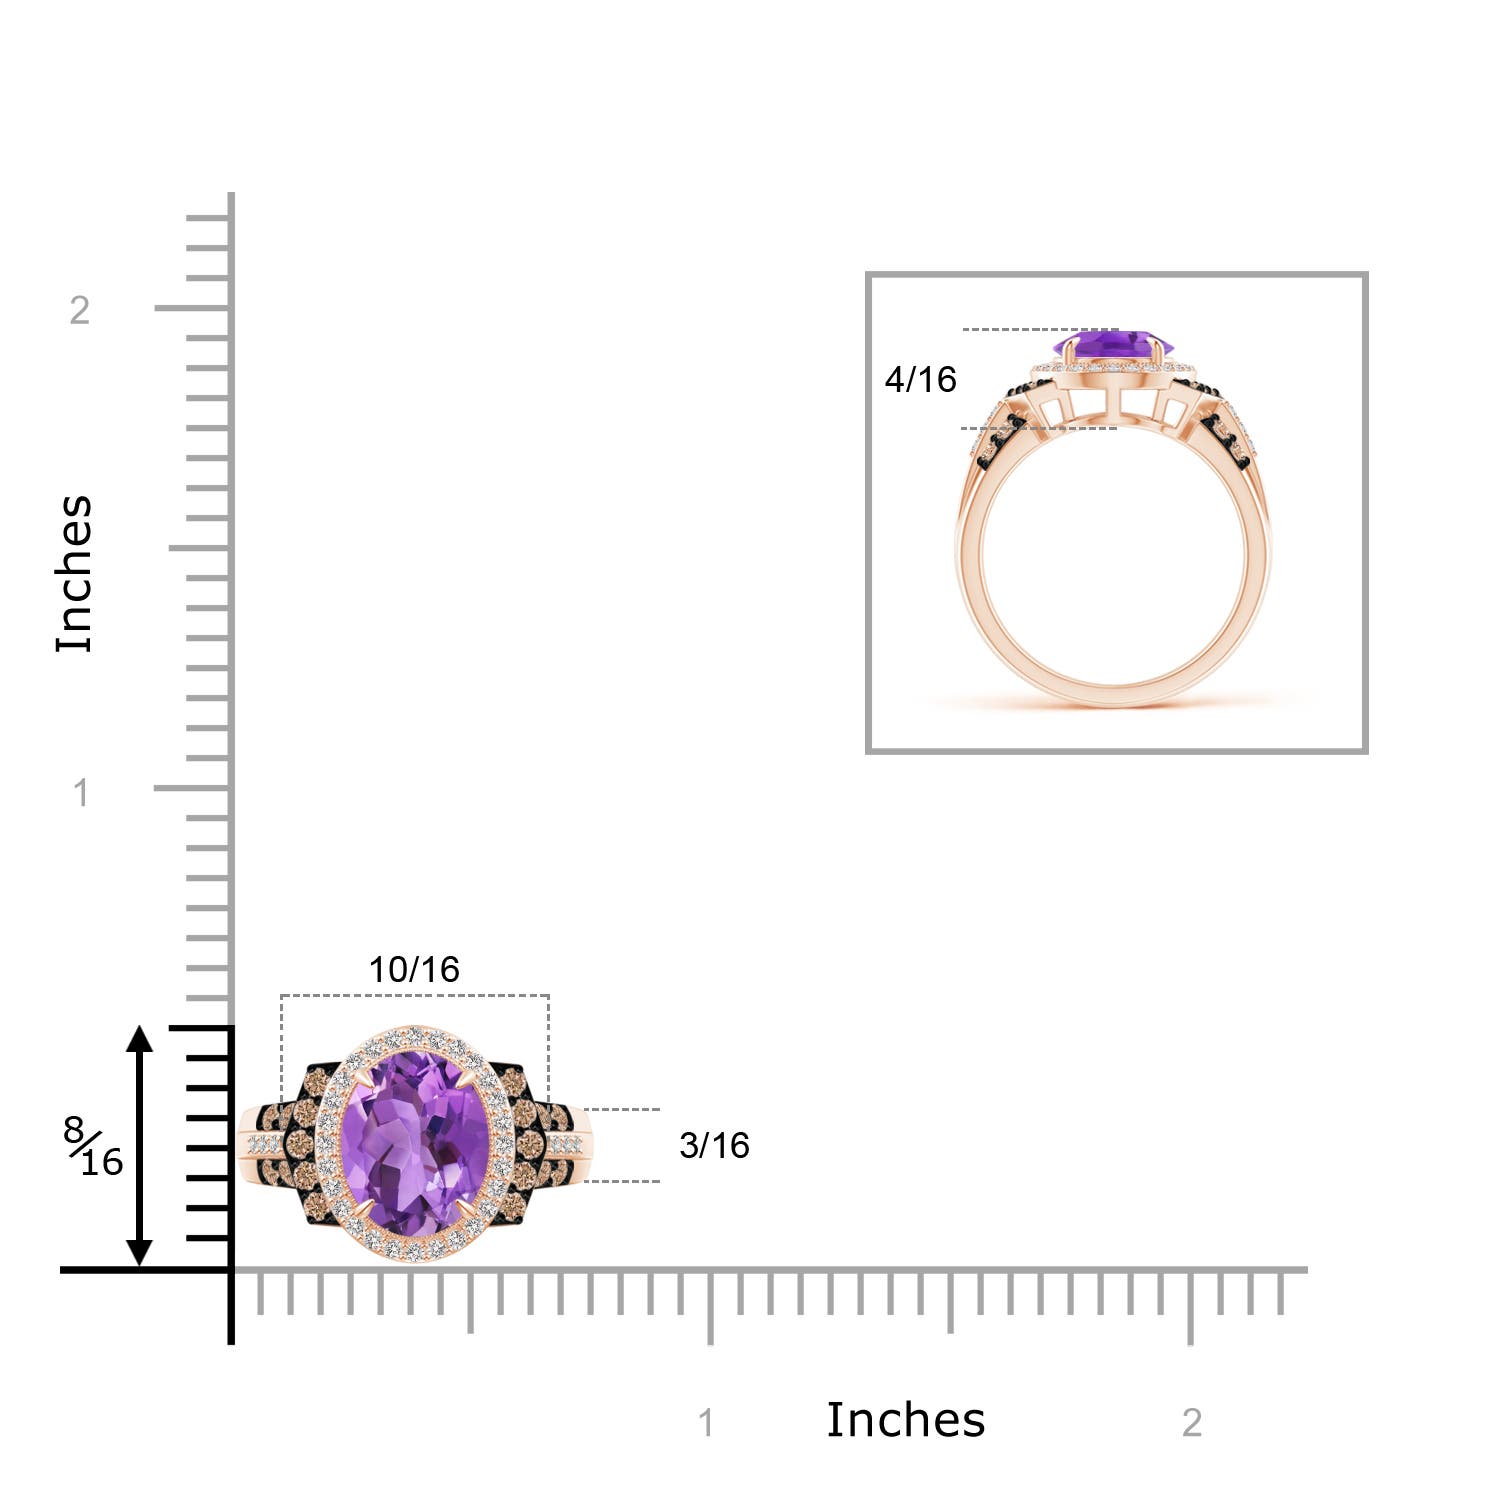 AA - Amethyst / 2.02 CT / 14 KT Rose Gold